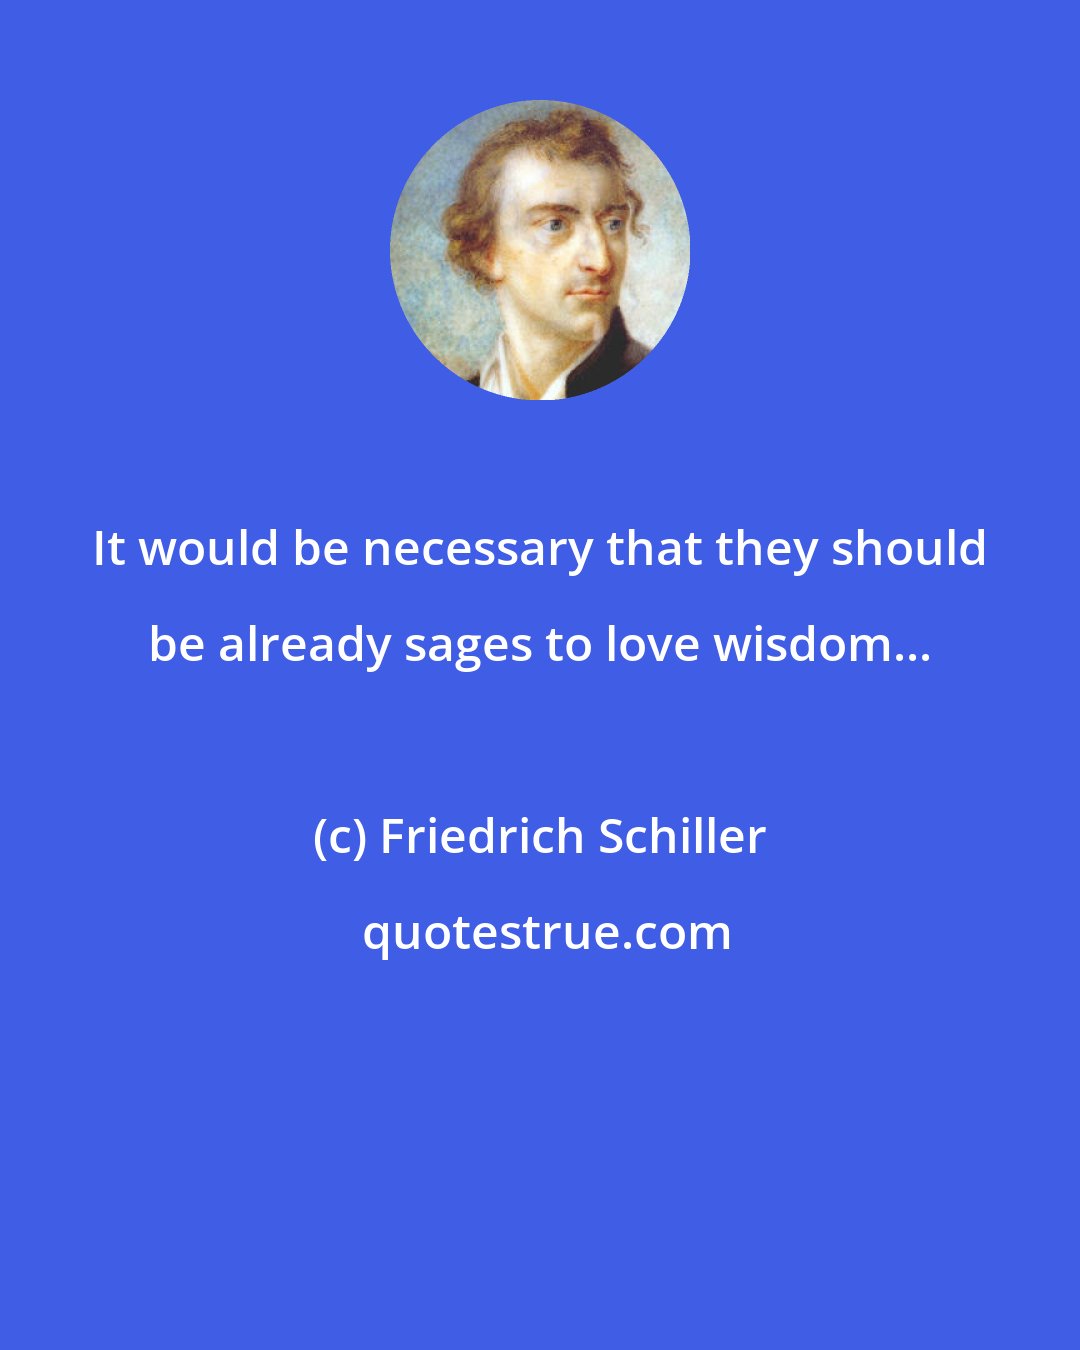 Friedrich Schiller: It would be necessary that they should be already sages to love wisdom...